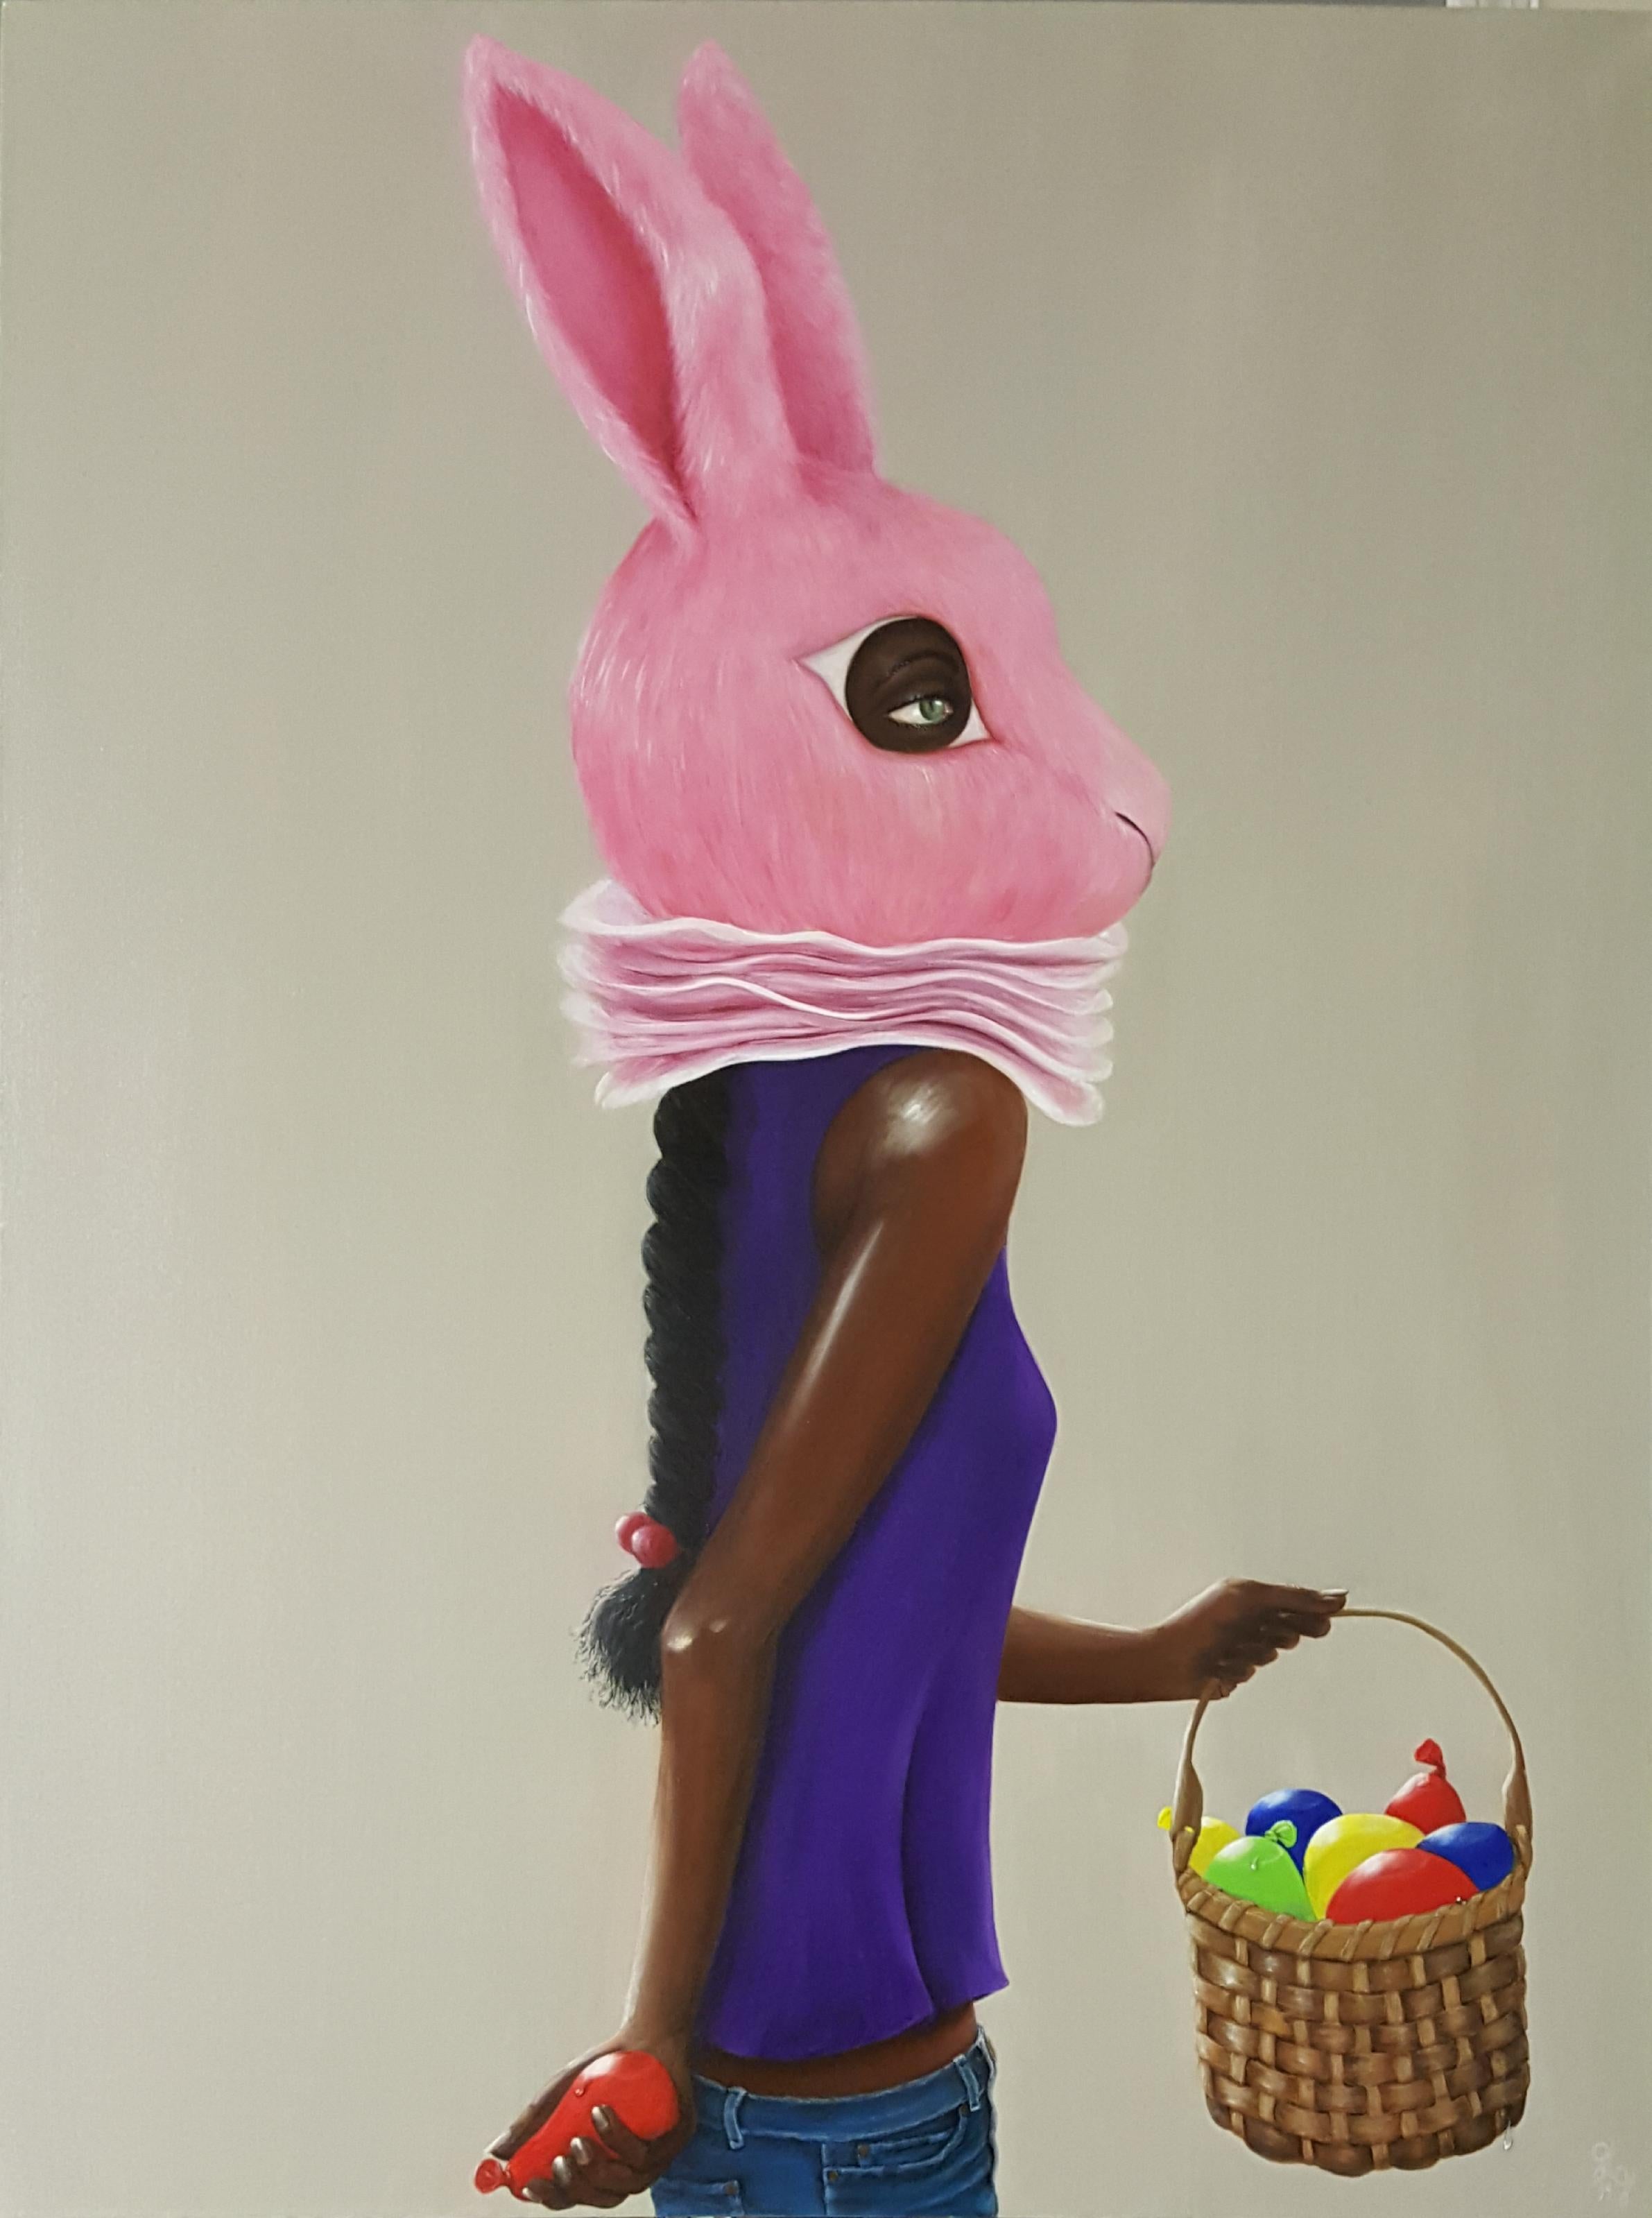 Georgia Griffin Figurative Painting - Adolescence: Water Balloons